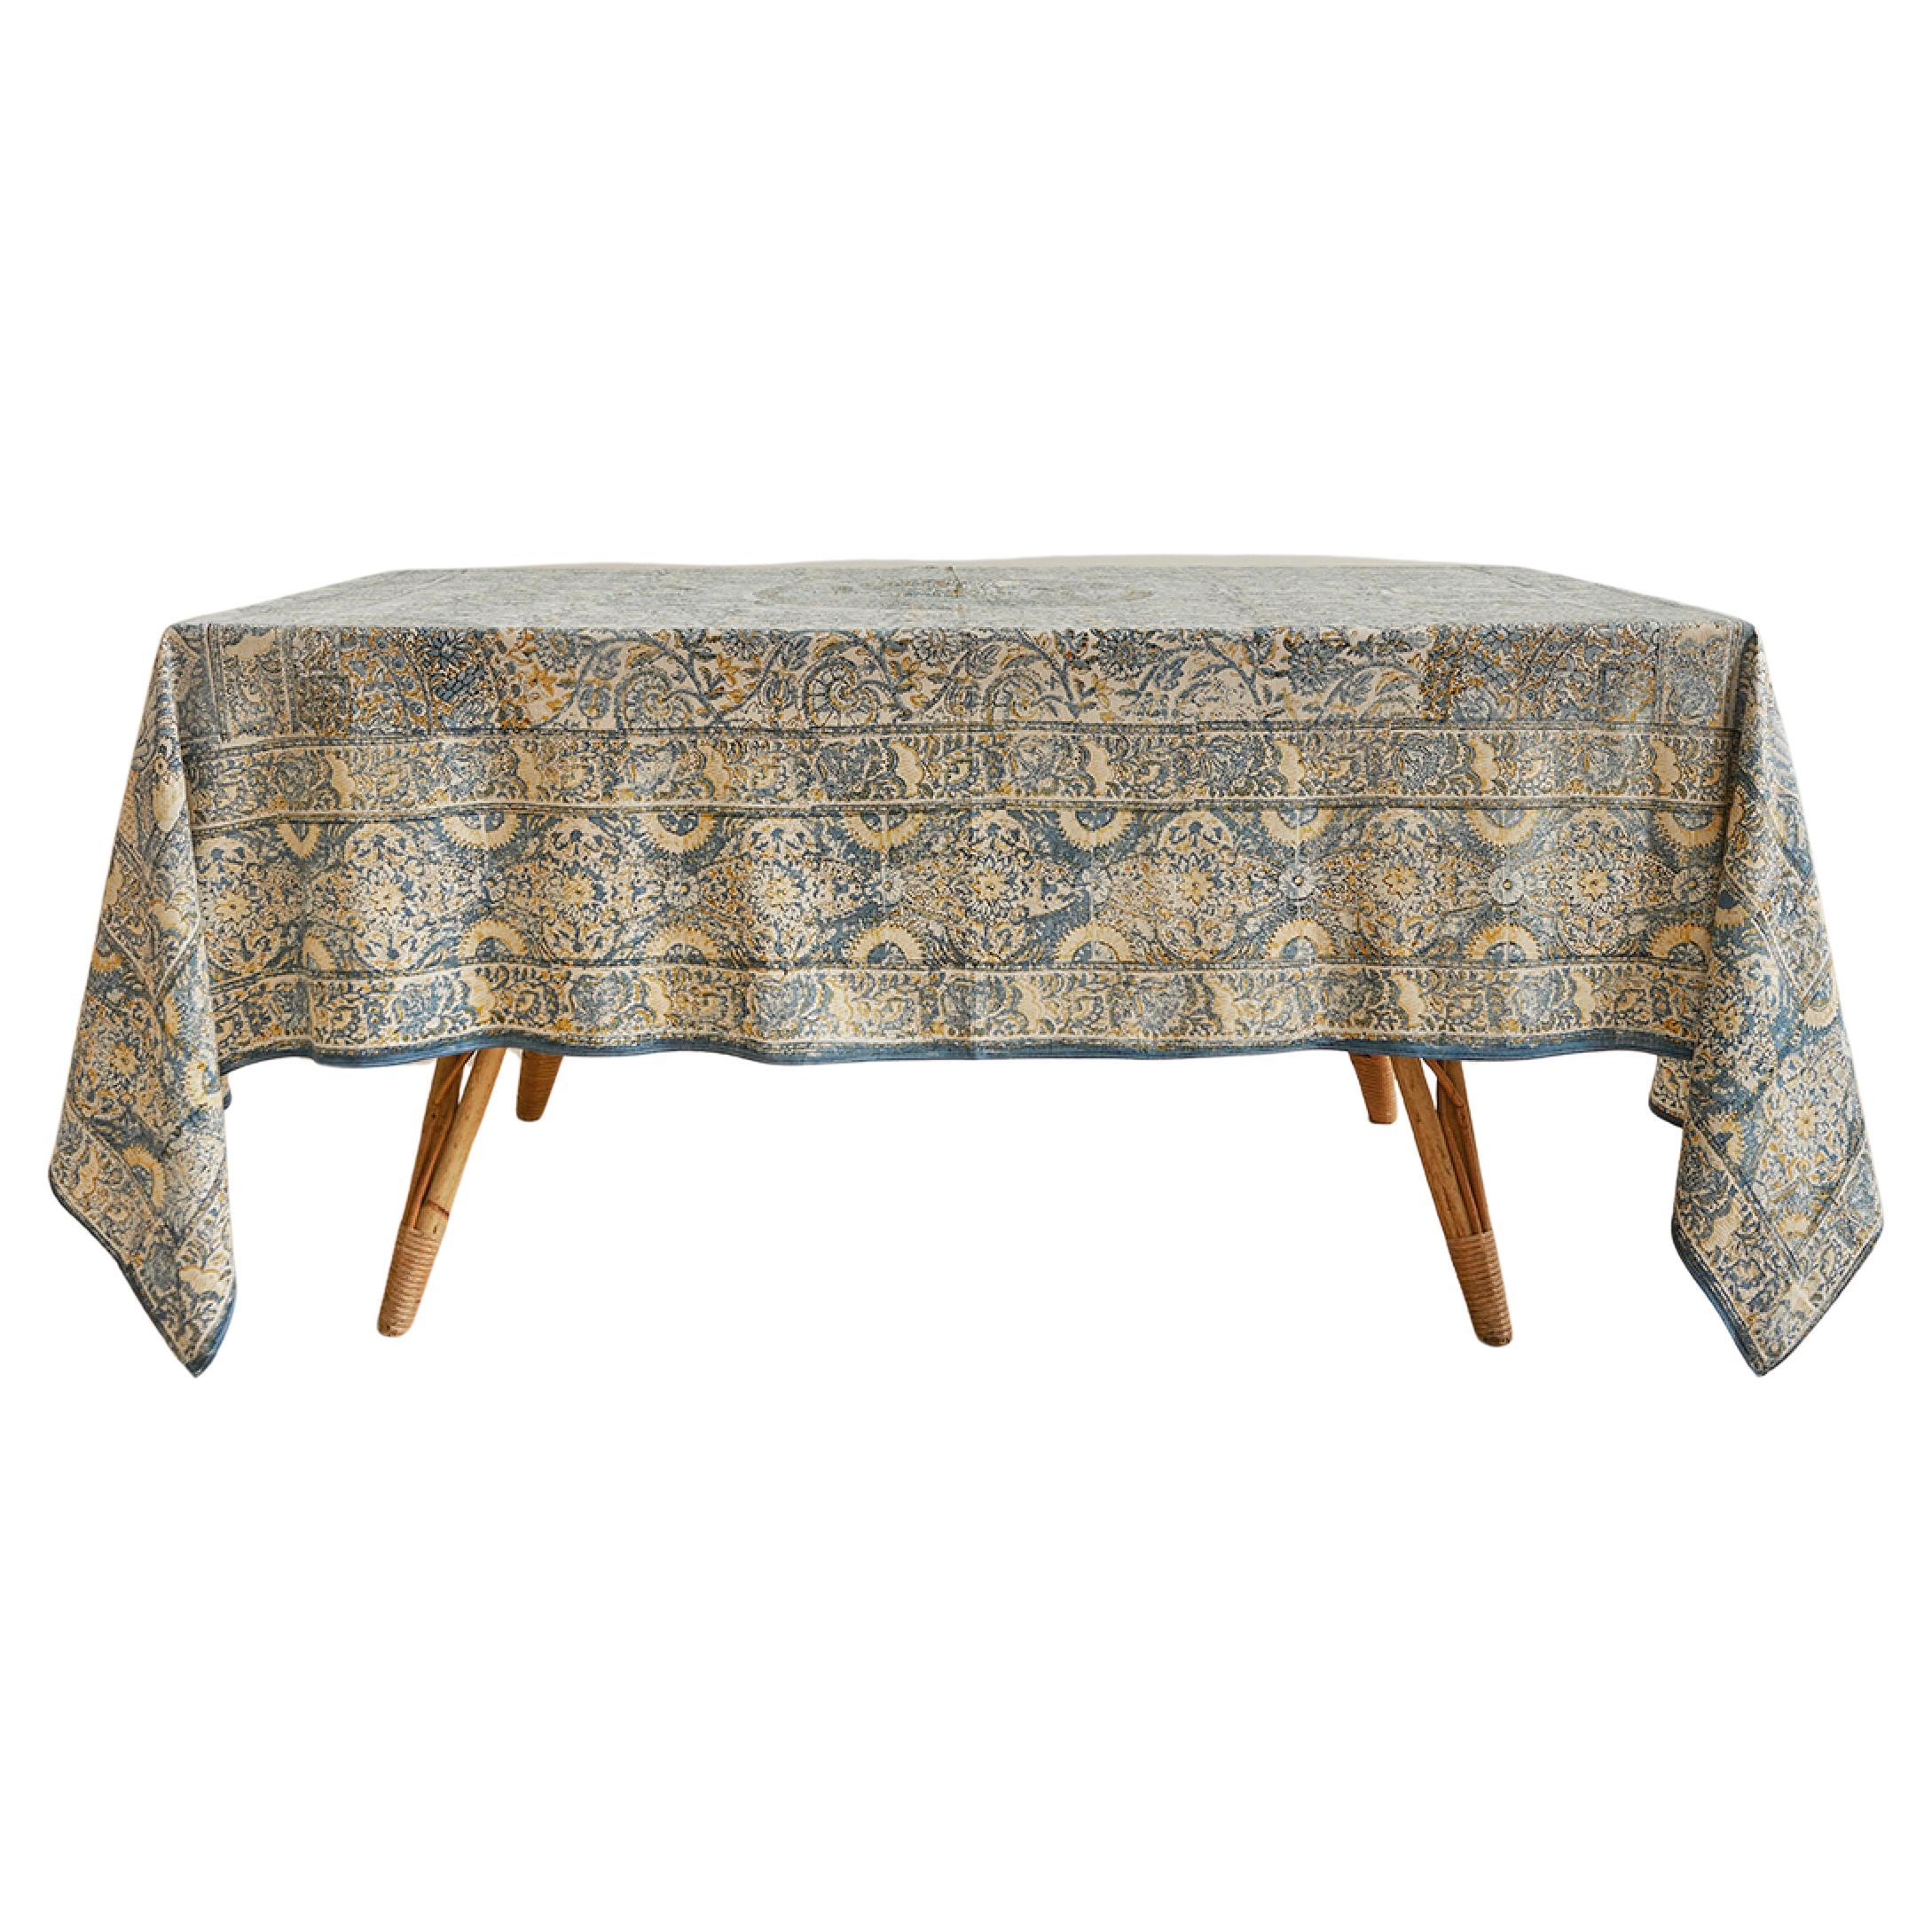 Vintage Blue and Yellow Block Printed Table Cloth, India, 1950s For Sale